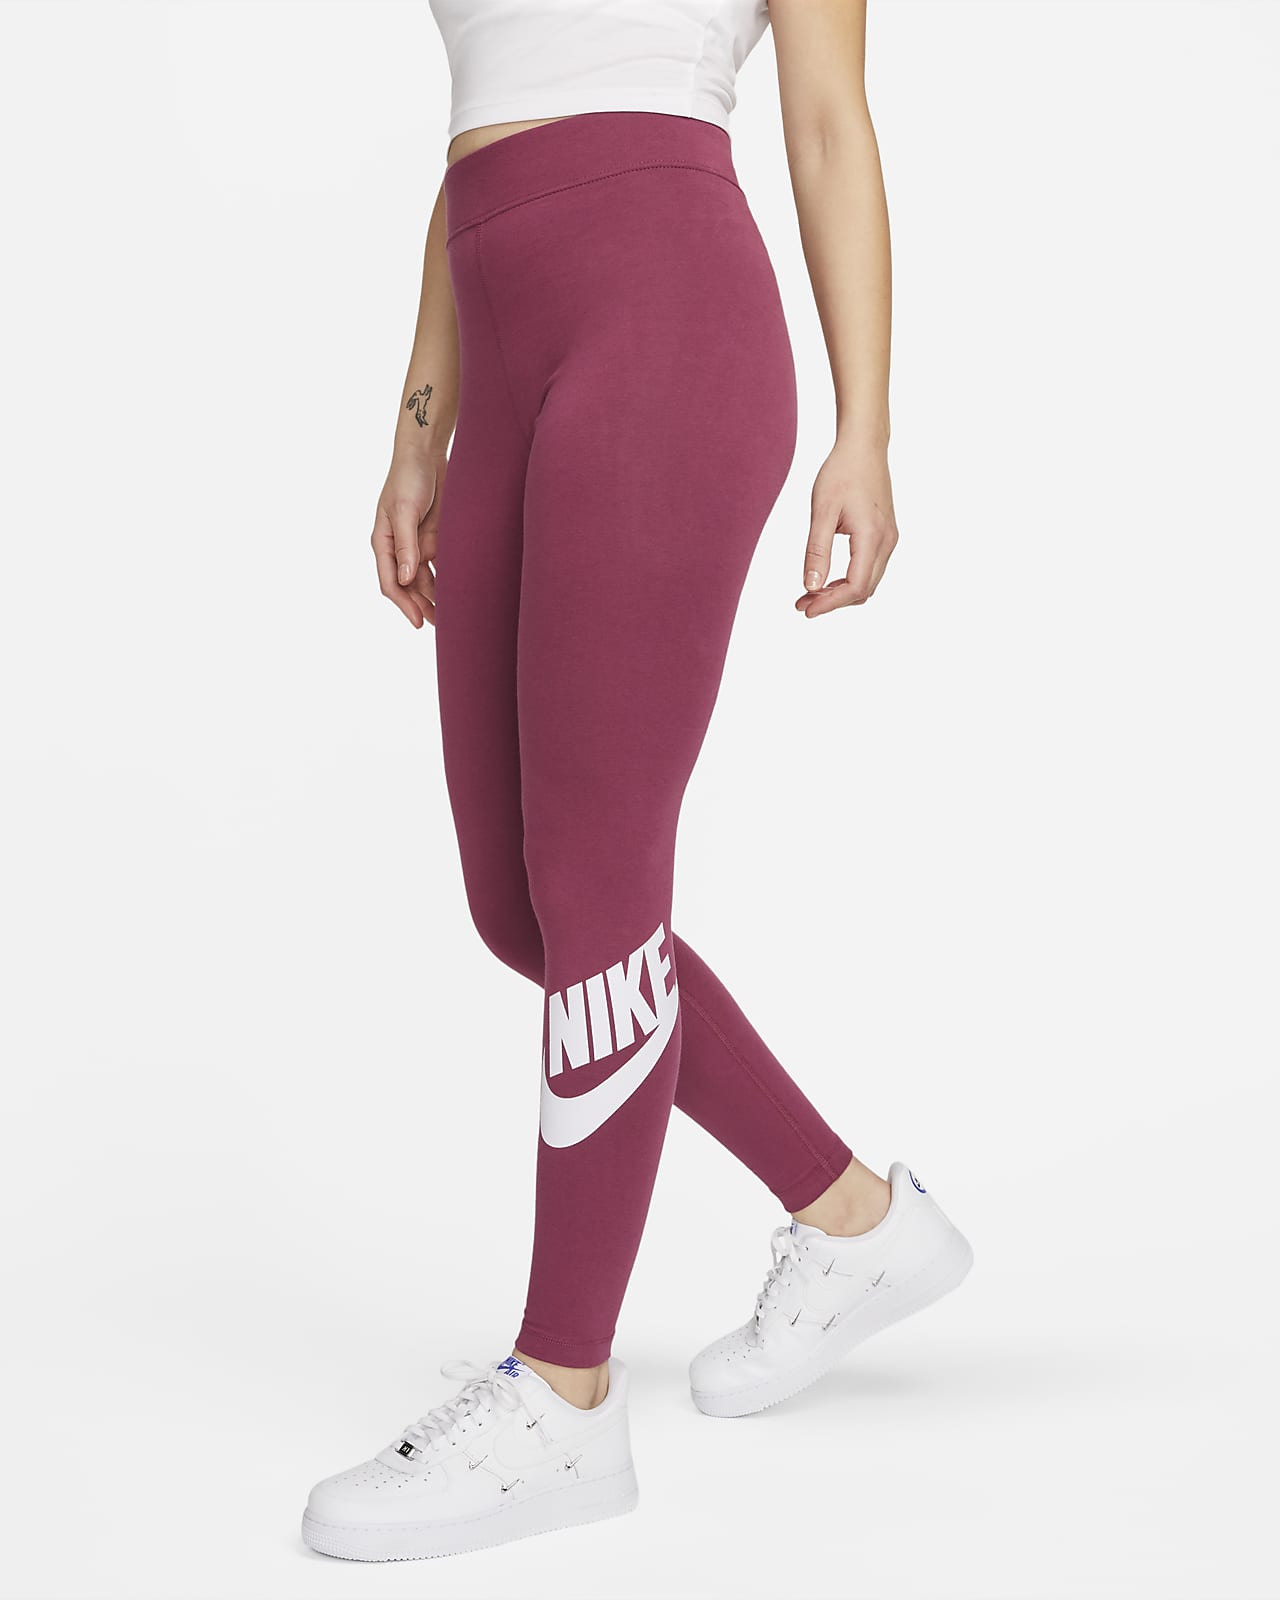 highway map Unsuitable nike all over logo leggings Beyond doubt